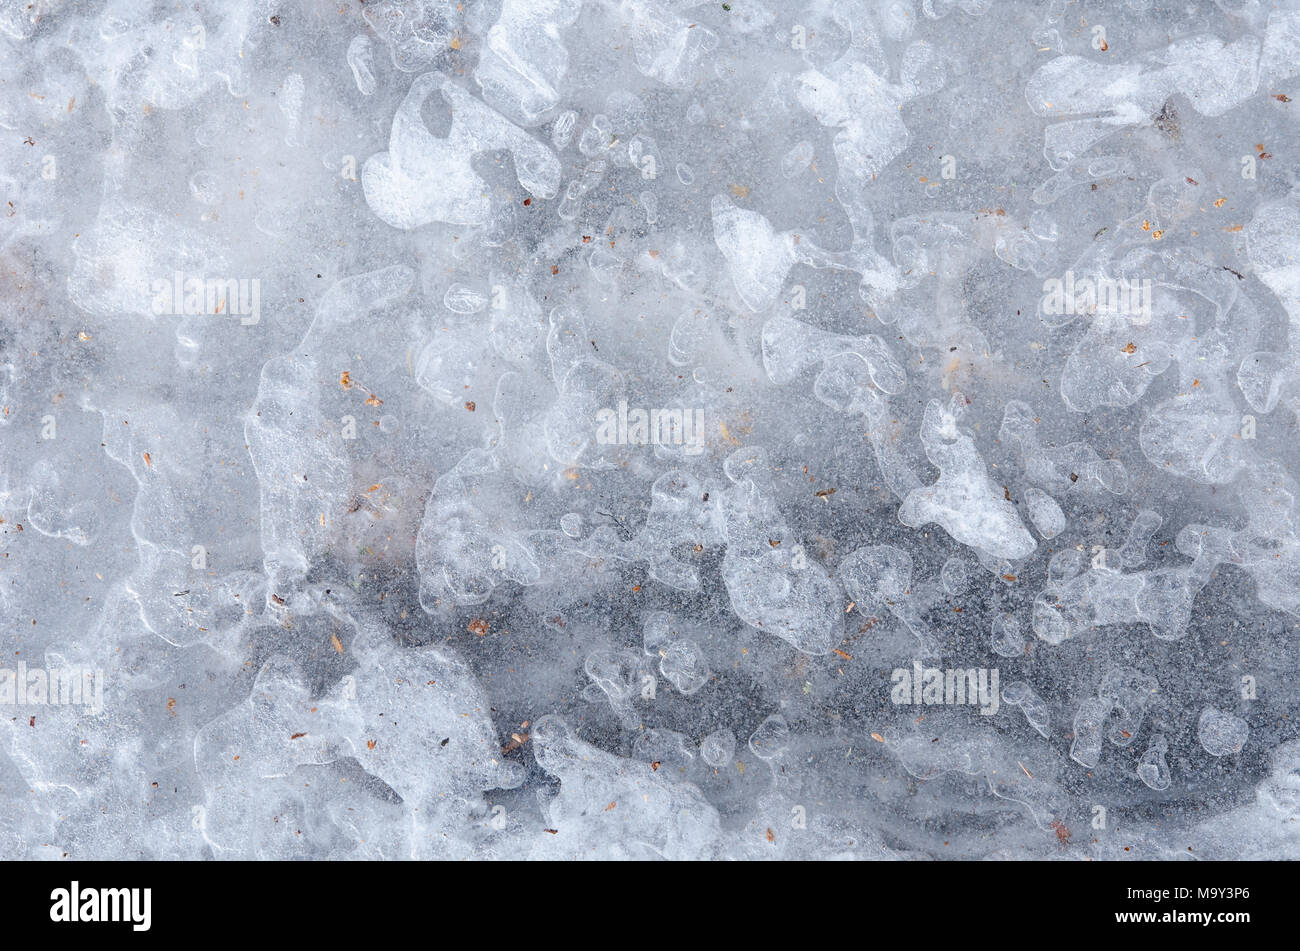 water ice surface with interesting natural patterns and textures Stock Photo